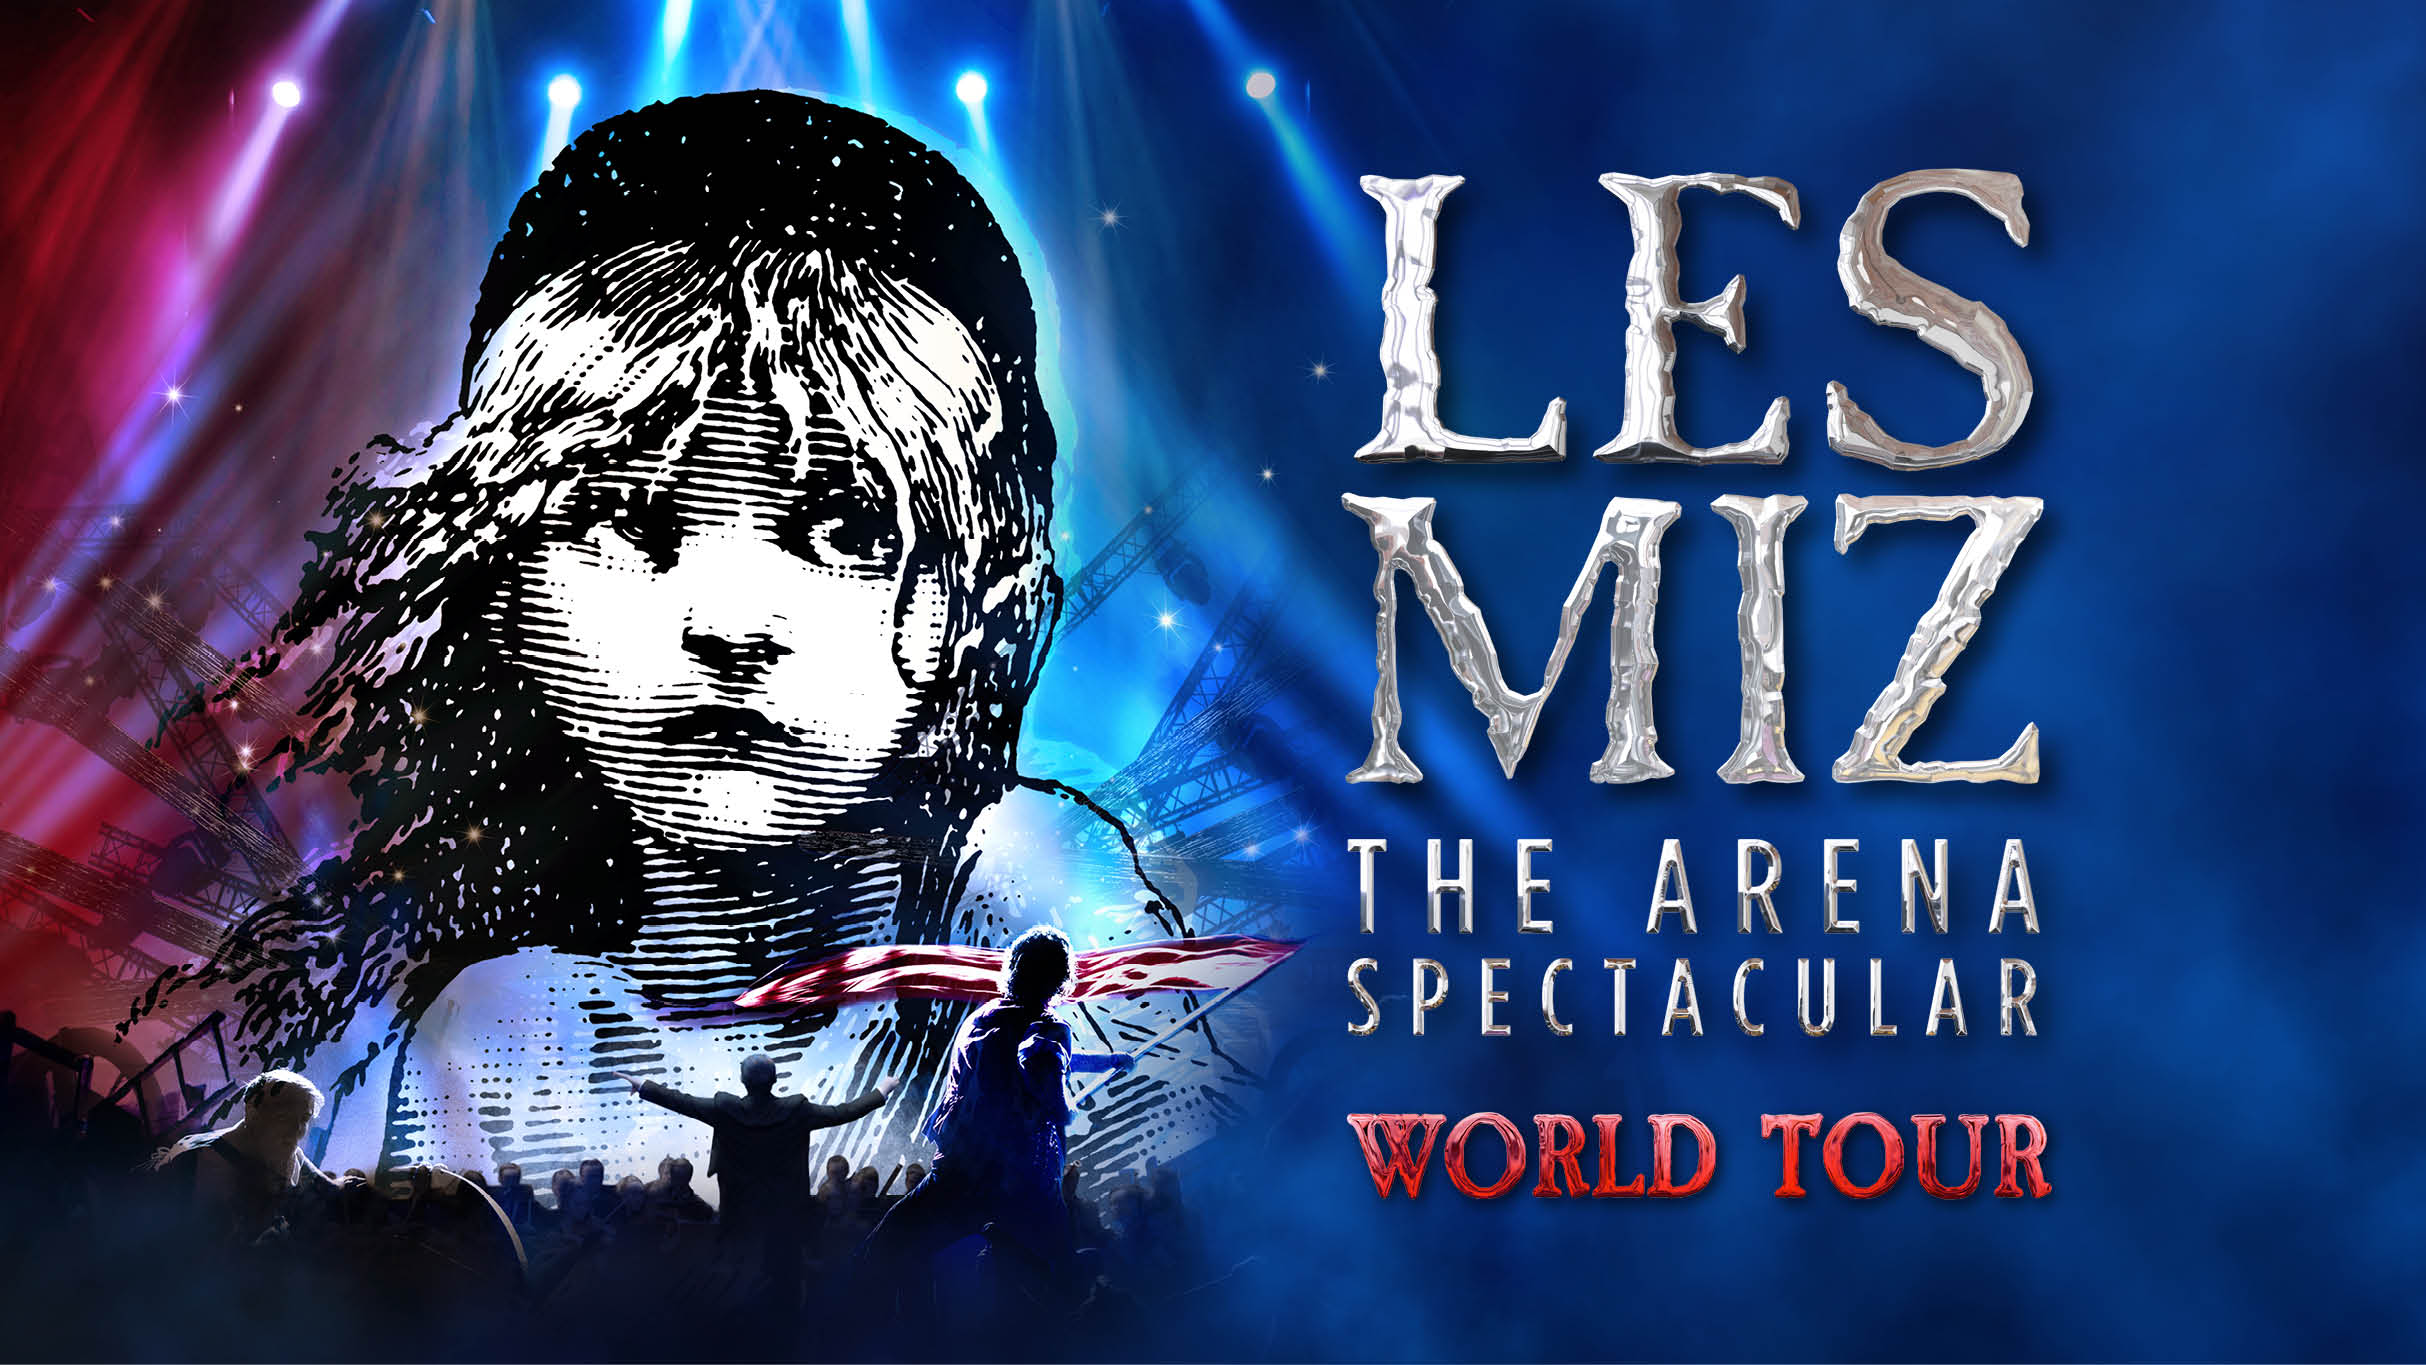 Image name Les Miserables The Arena Spectacular at Utilita Arena Sheffield Sheffield the 24 image from the post Les Miserables: The Arena Spectacular at Utilita Arena Sheffield, Sheffield in Yorkshire.com.